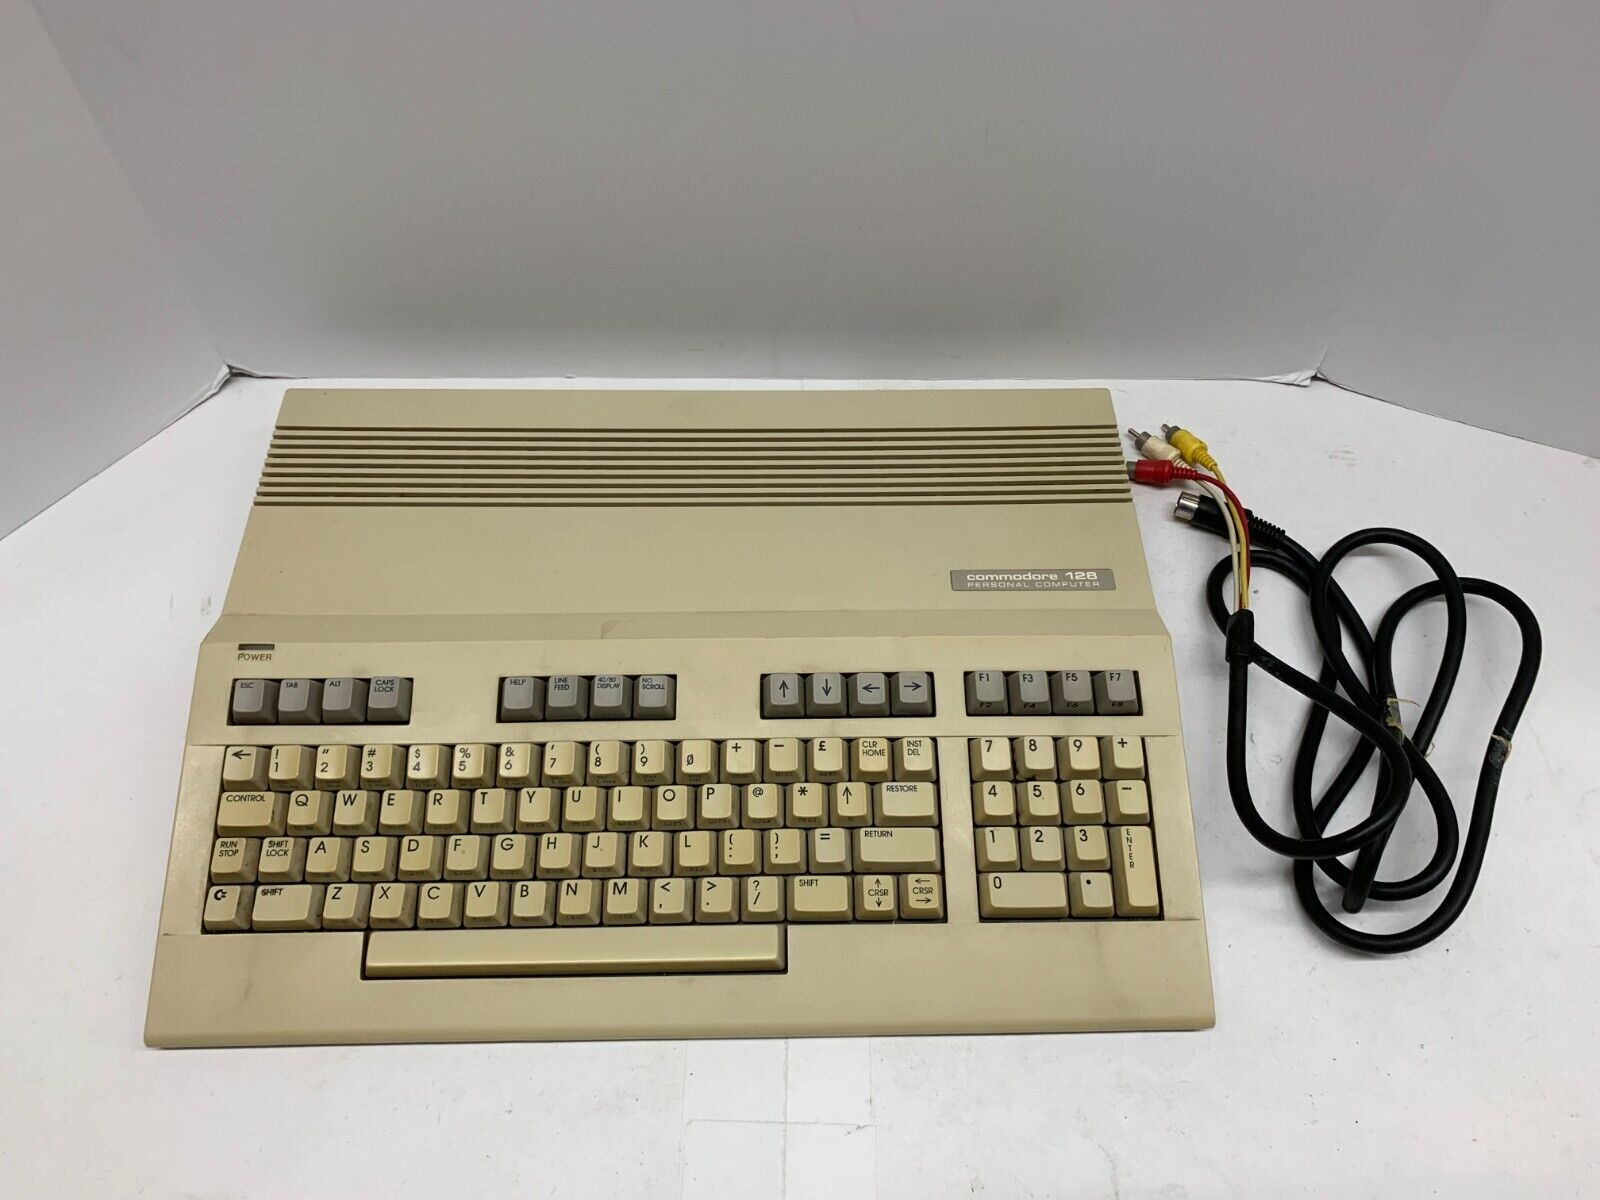 Commodore 128 Personal Computer Keyboard C128 (UNTESTED) w/Video Cable QWERTY